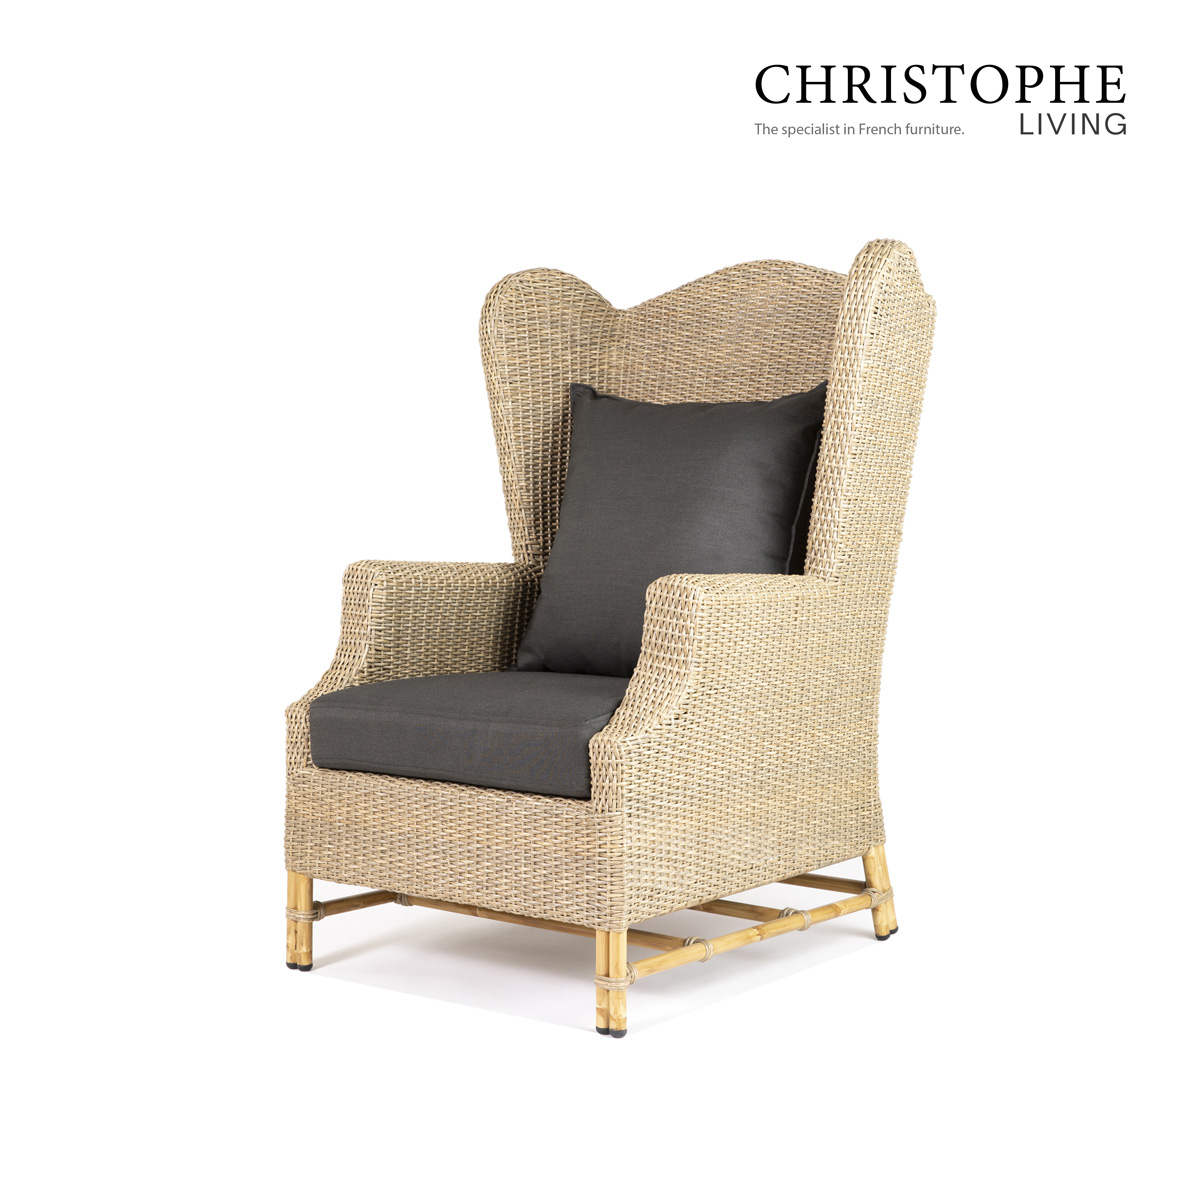 Port Douglas French Provincial Outdoor Wing Chair - Natural Rattan and Wicker in Beach Teak with Charcoal Polyester Fabric